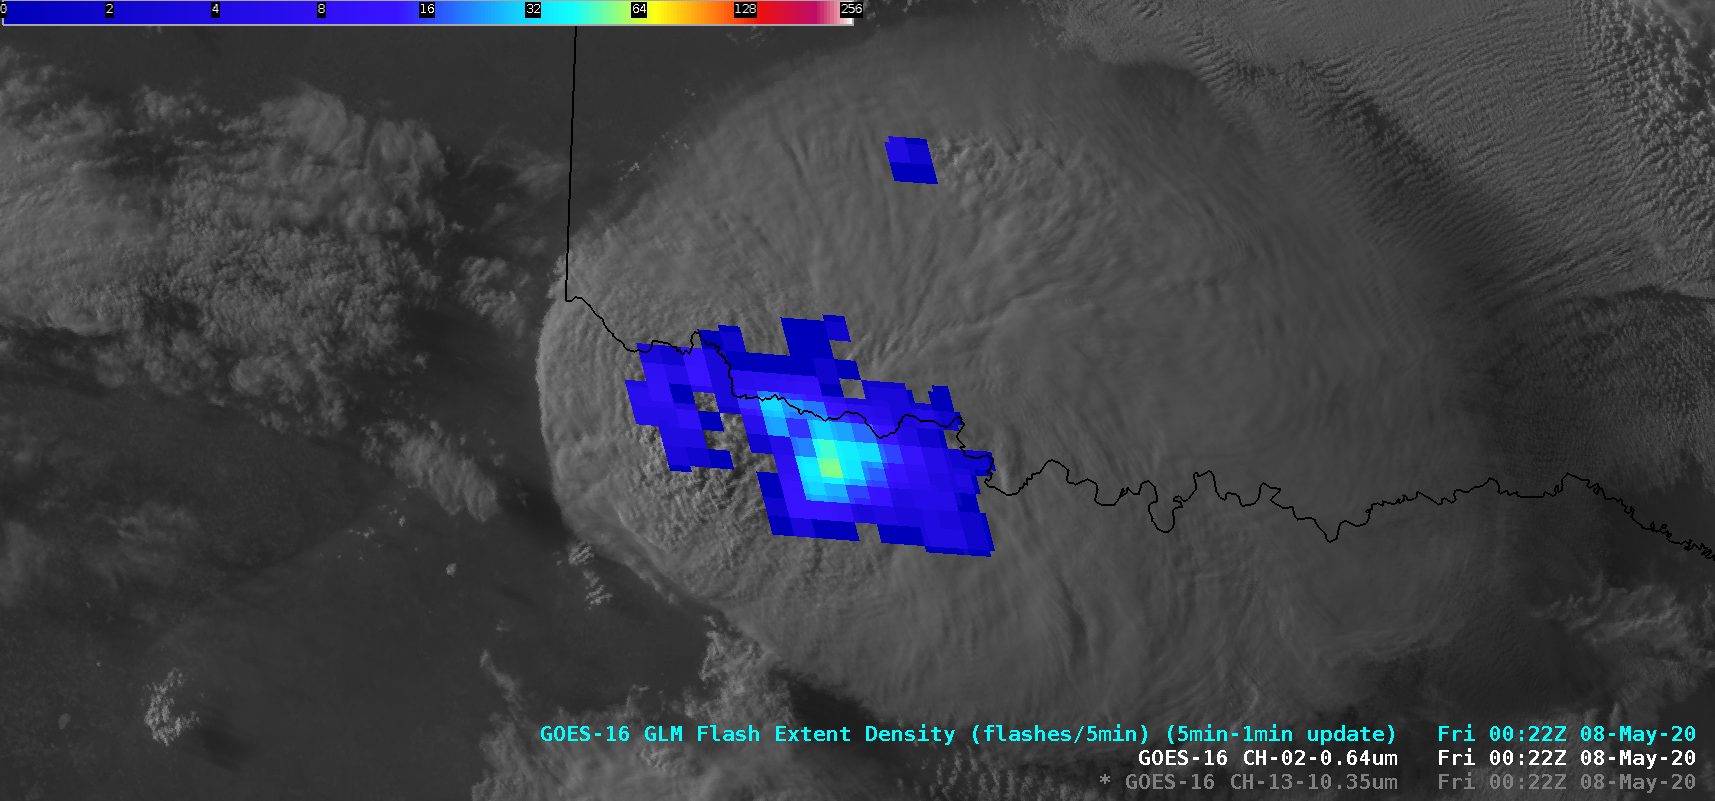 GOES-16 "Red" Visible (0.64 µm) images, with and without an overlay of GLM Flash Extent Density [click to play animation | MP4]